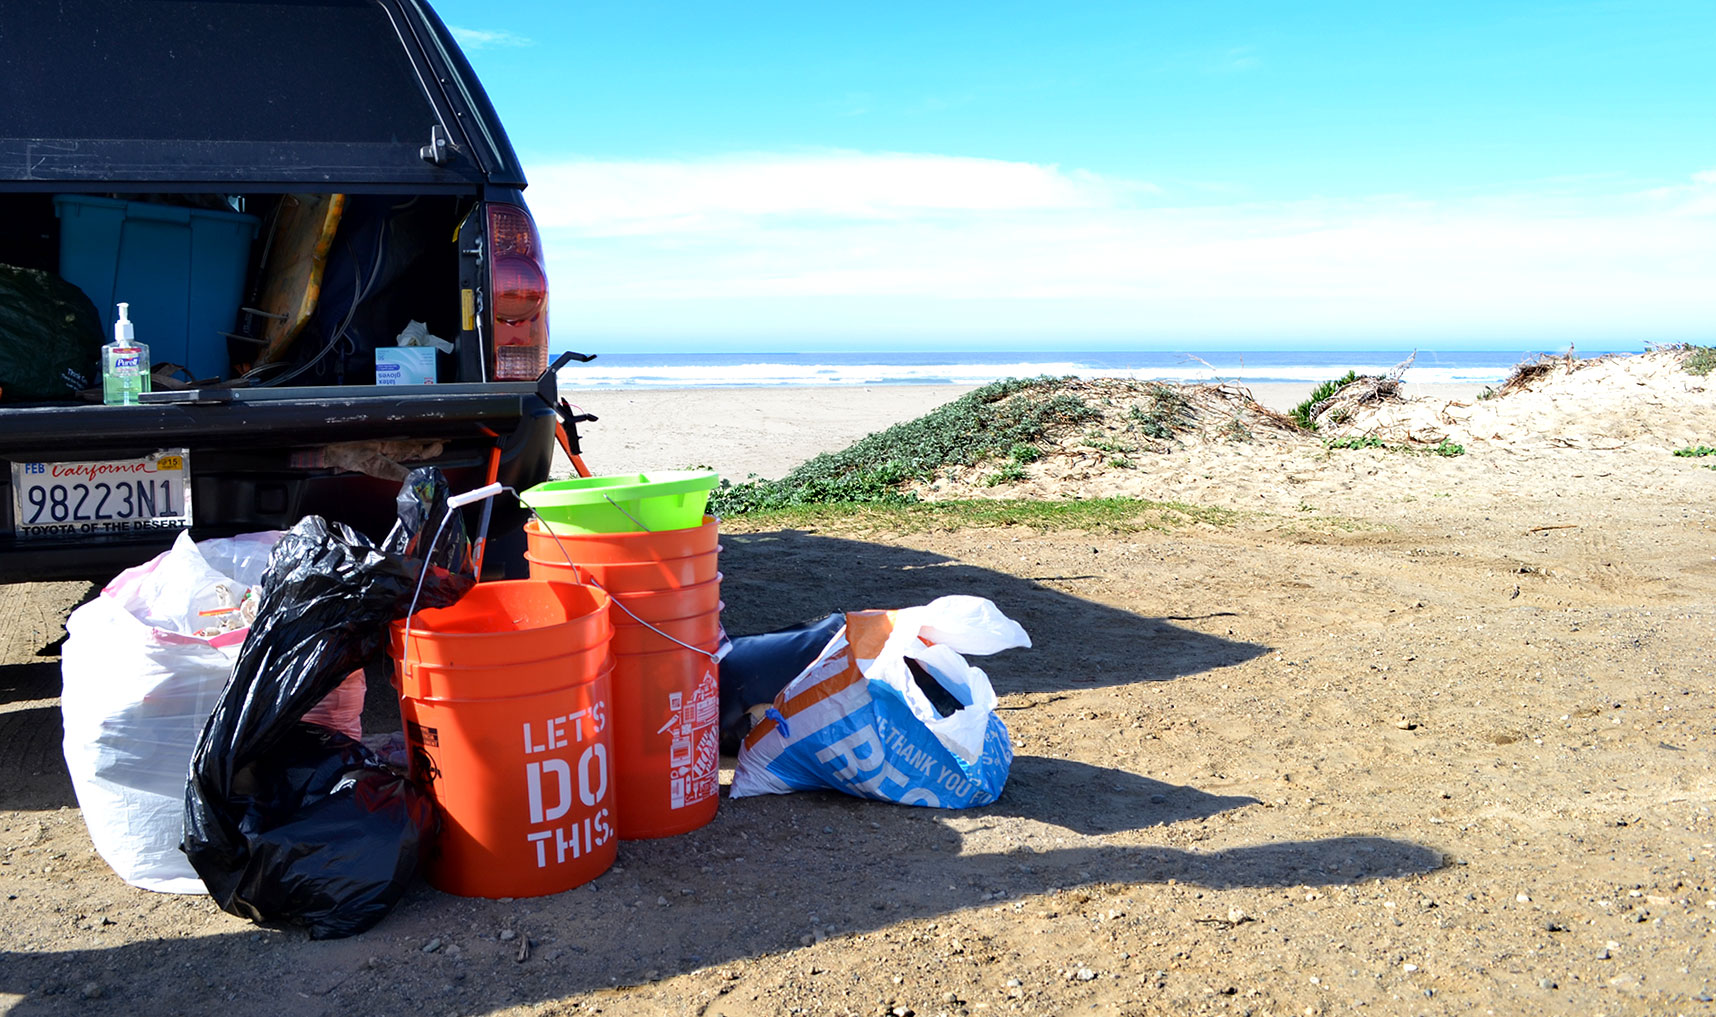  Equipment provided by the club’s parent organization Surfrider Foundation, such as buckets and trash pick-up tools, sit next to the filled trash bags. Once all the litter has been collected, the bags are counted and loaded up in club members' trucks to be disposed of. The Surfriders chat about the cleanup before parting ways and agreeing to see each other at the next club meeting during the upcoming week. 